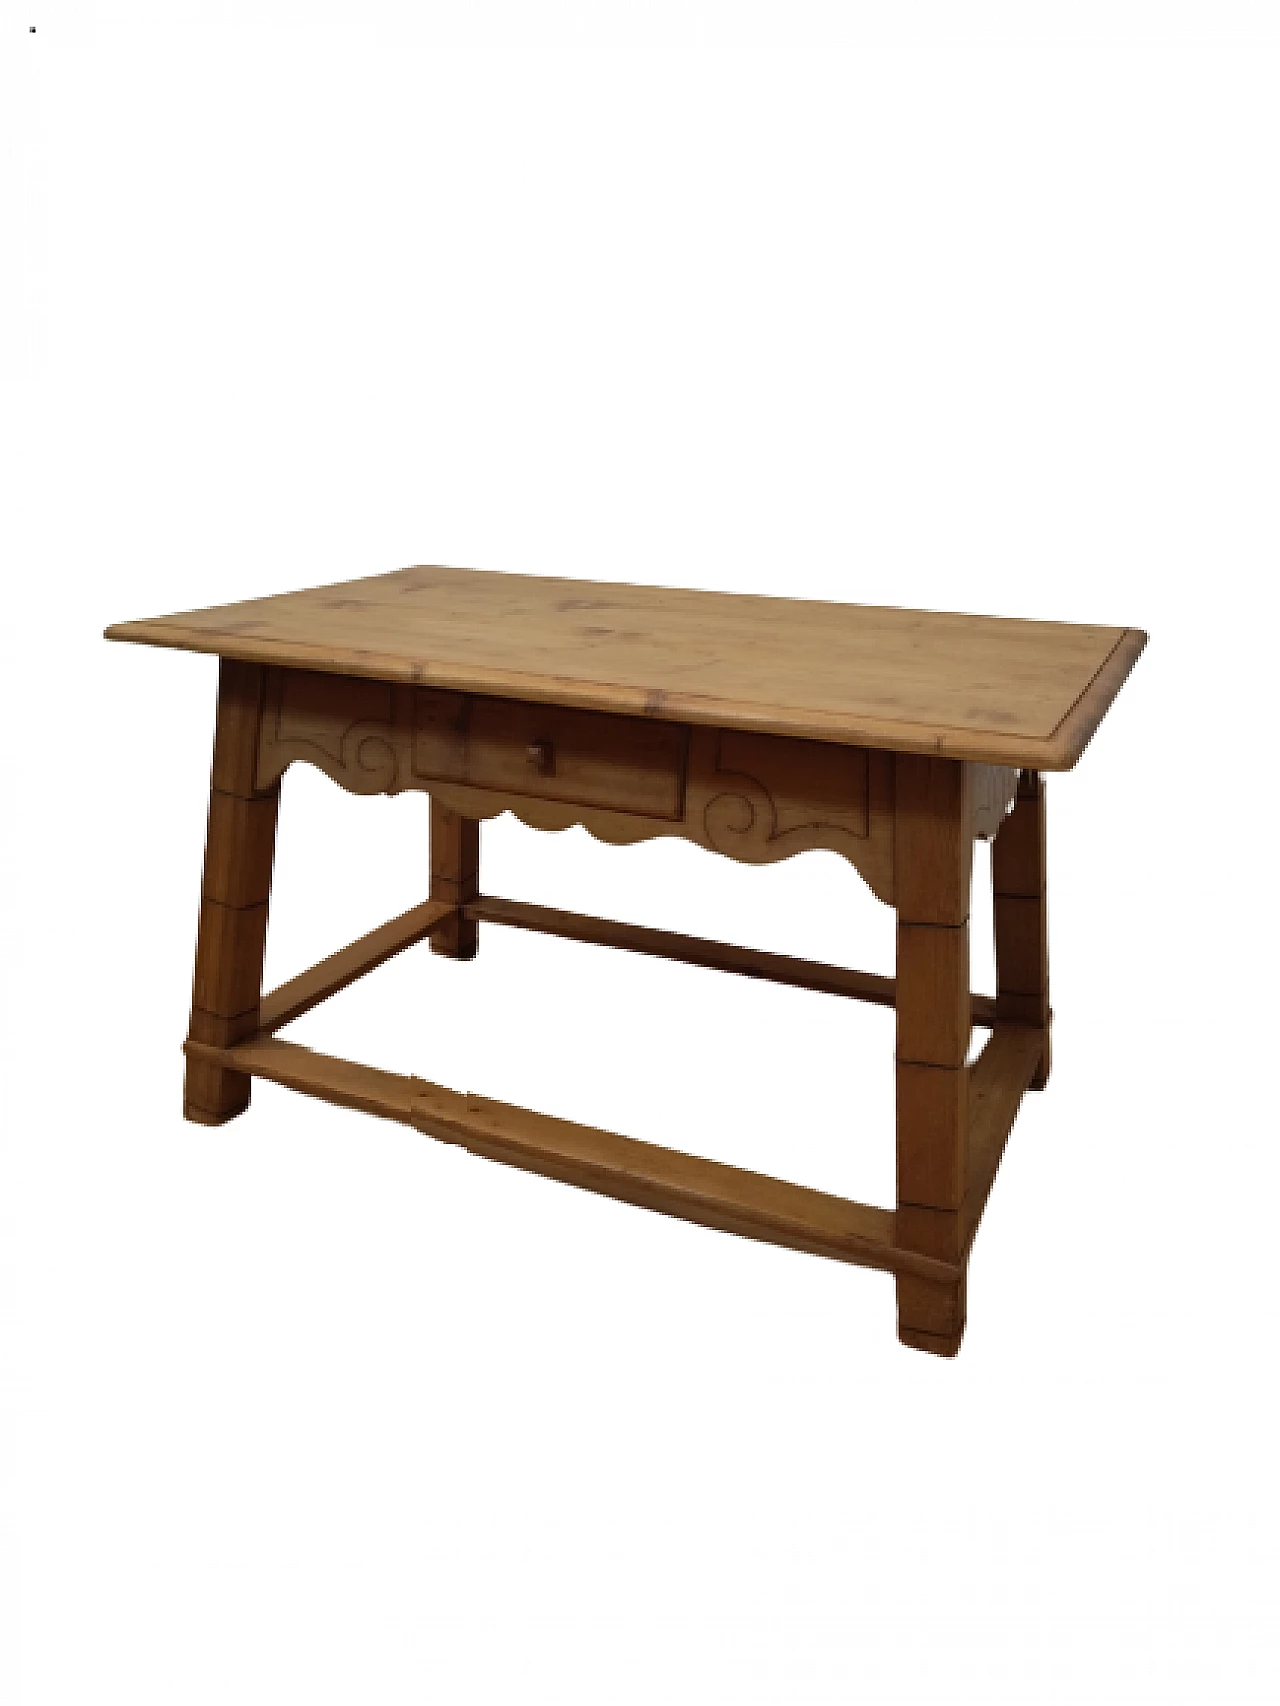 Tyrolese solid spruce table with drawer, 1938 23